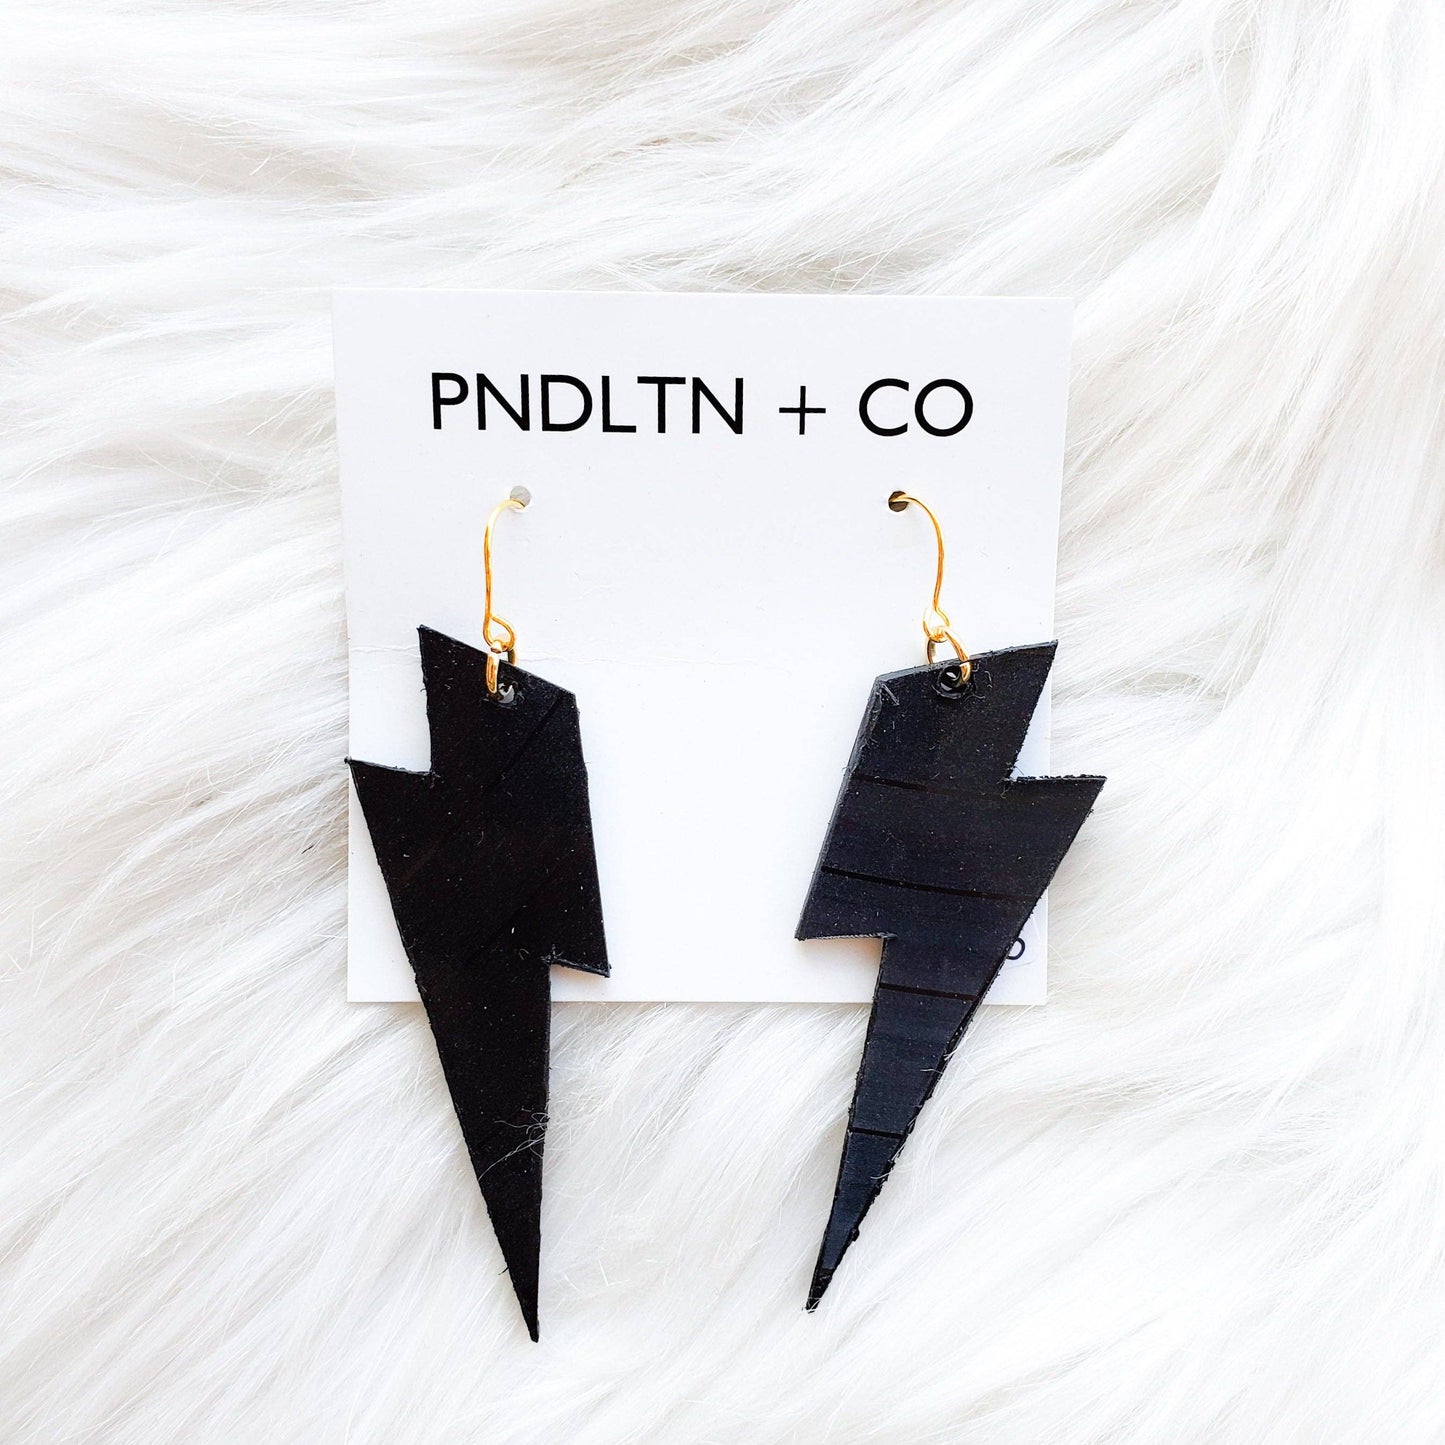 Bolted Recycled Vinyl Record Earrings